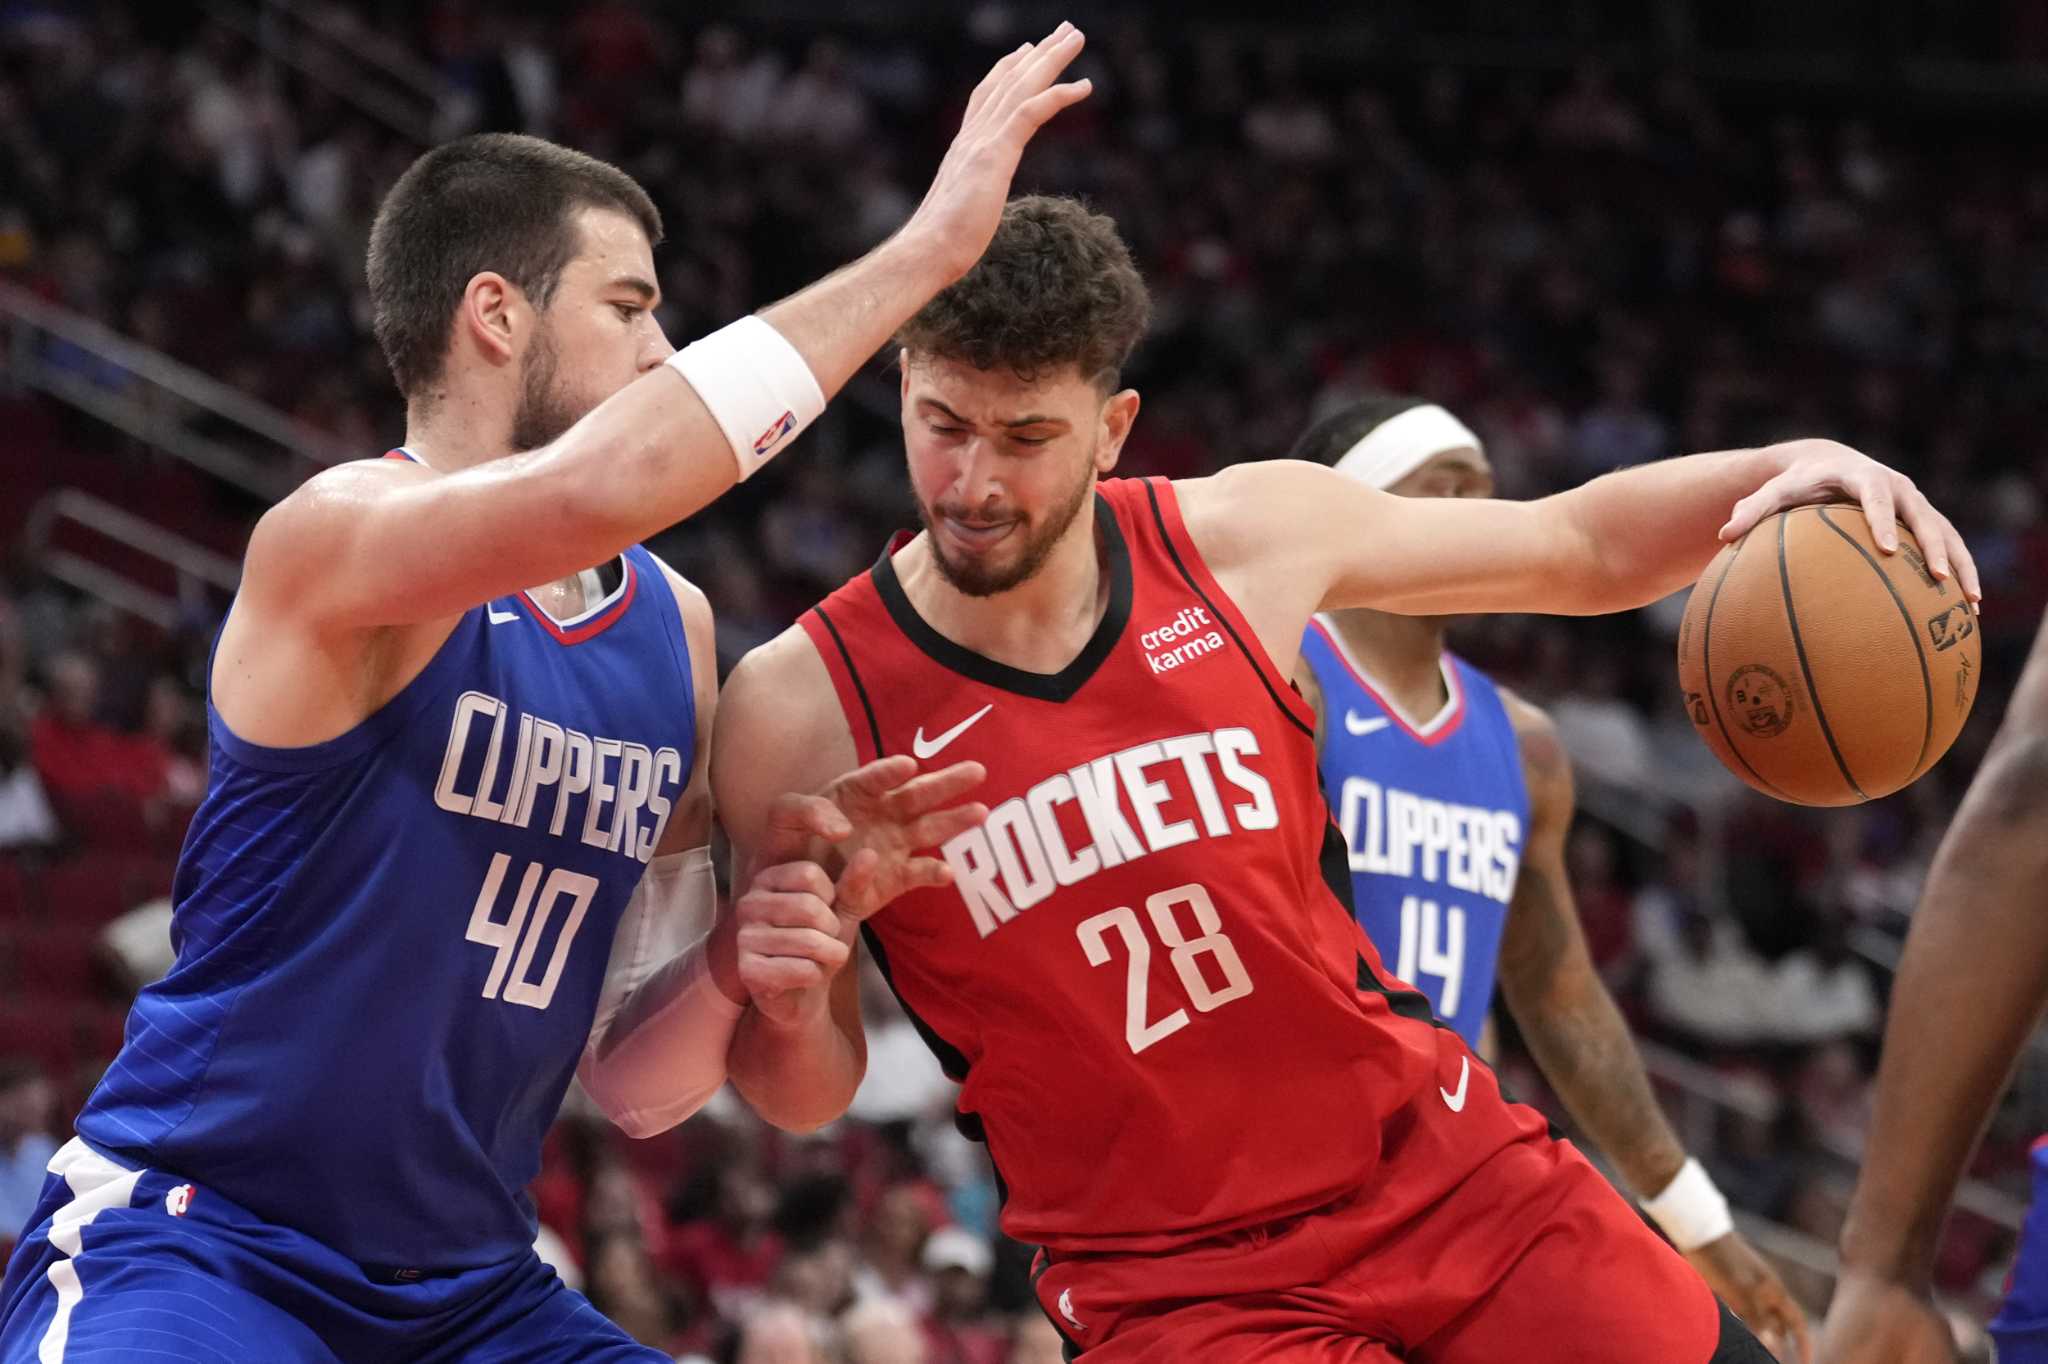 Houston Rockets' defense crumbles late in loss to L.A. Clippers